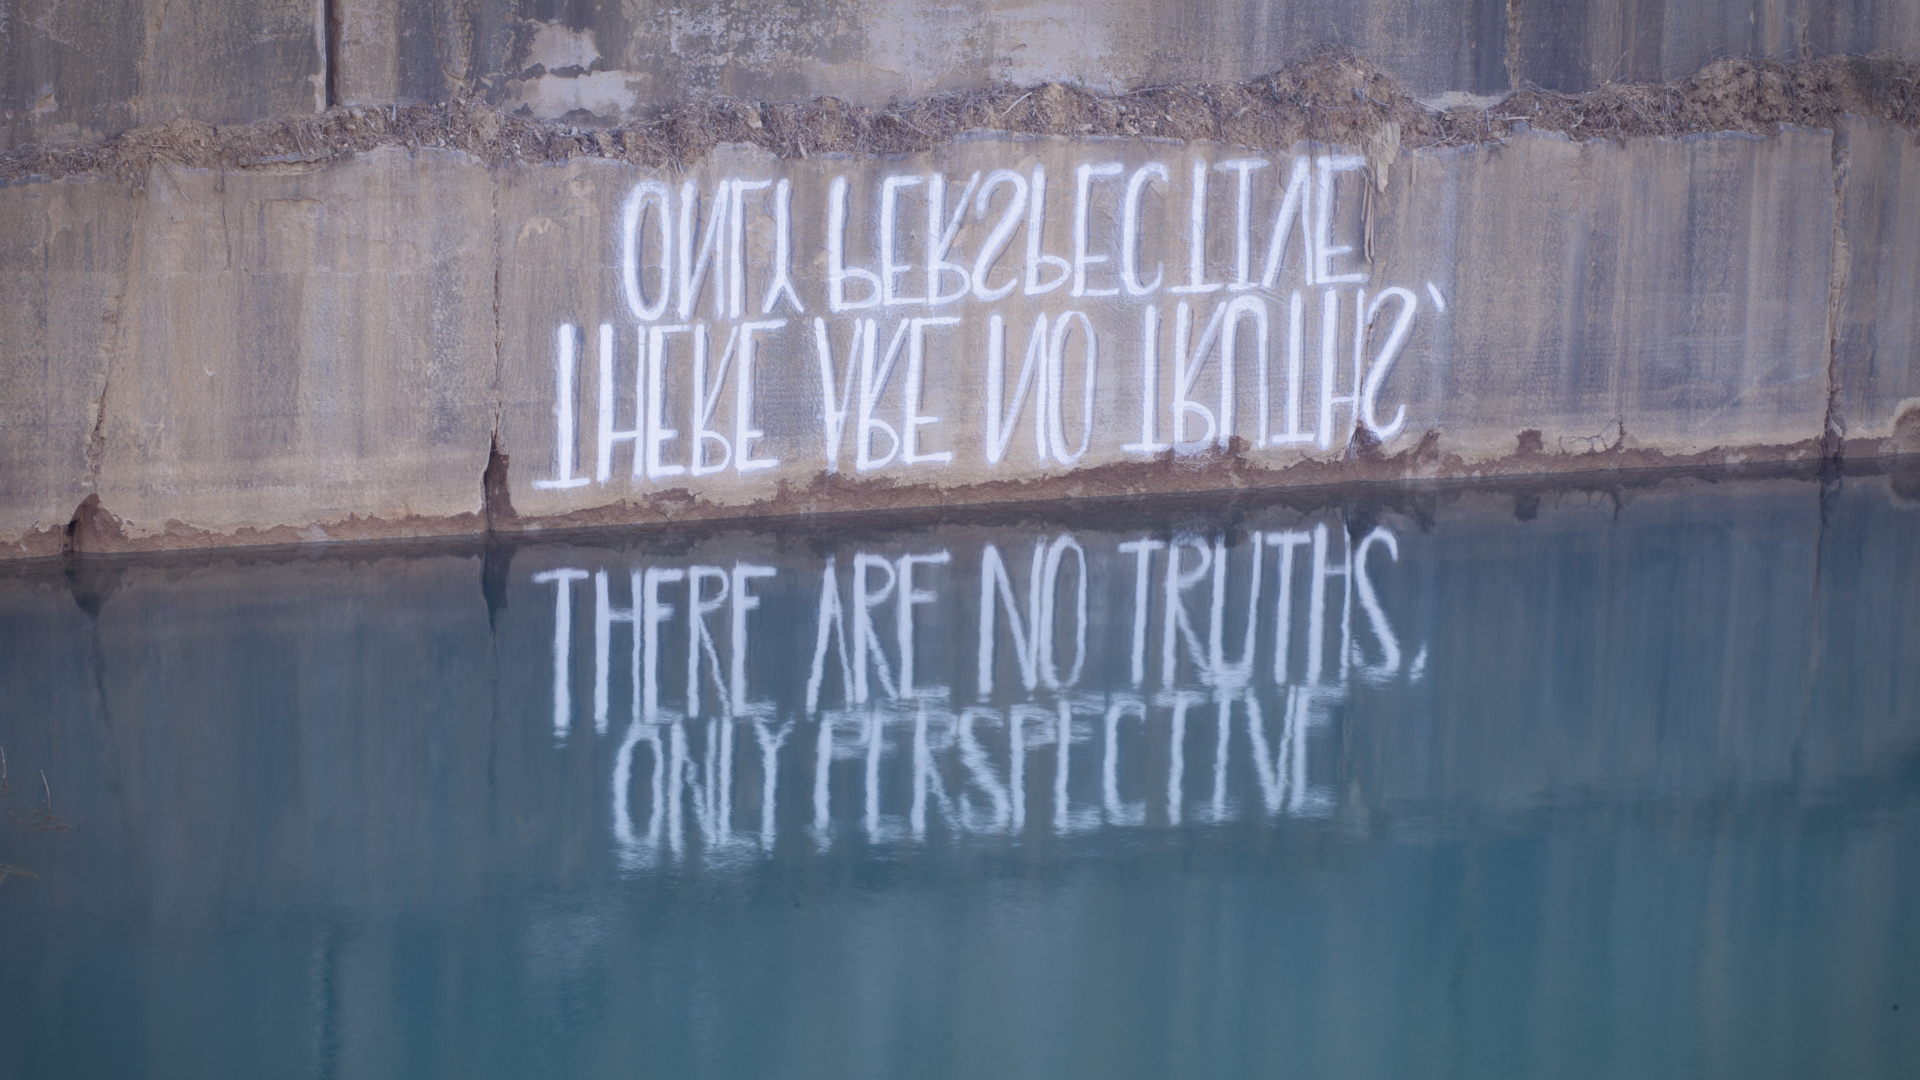 No Truth - Only Perspectives